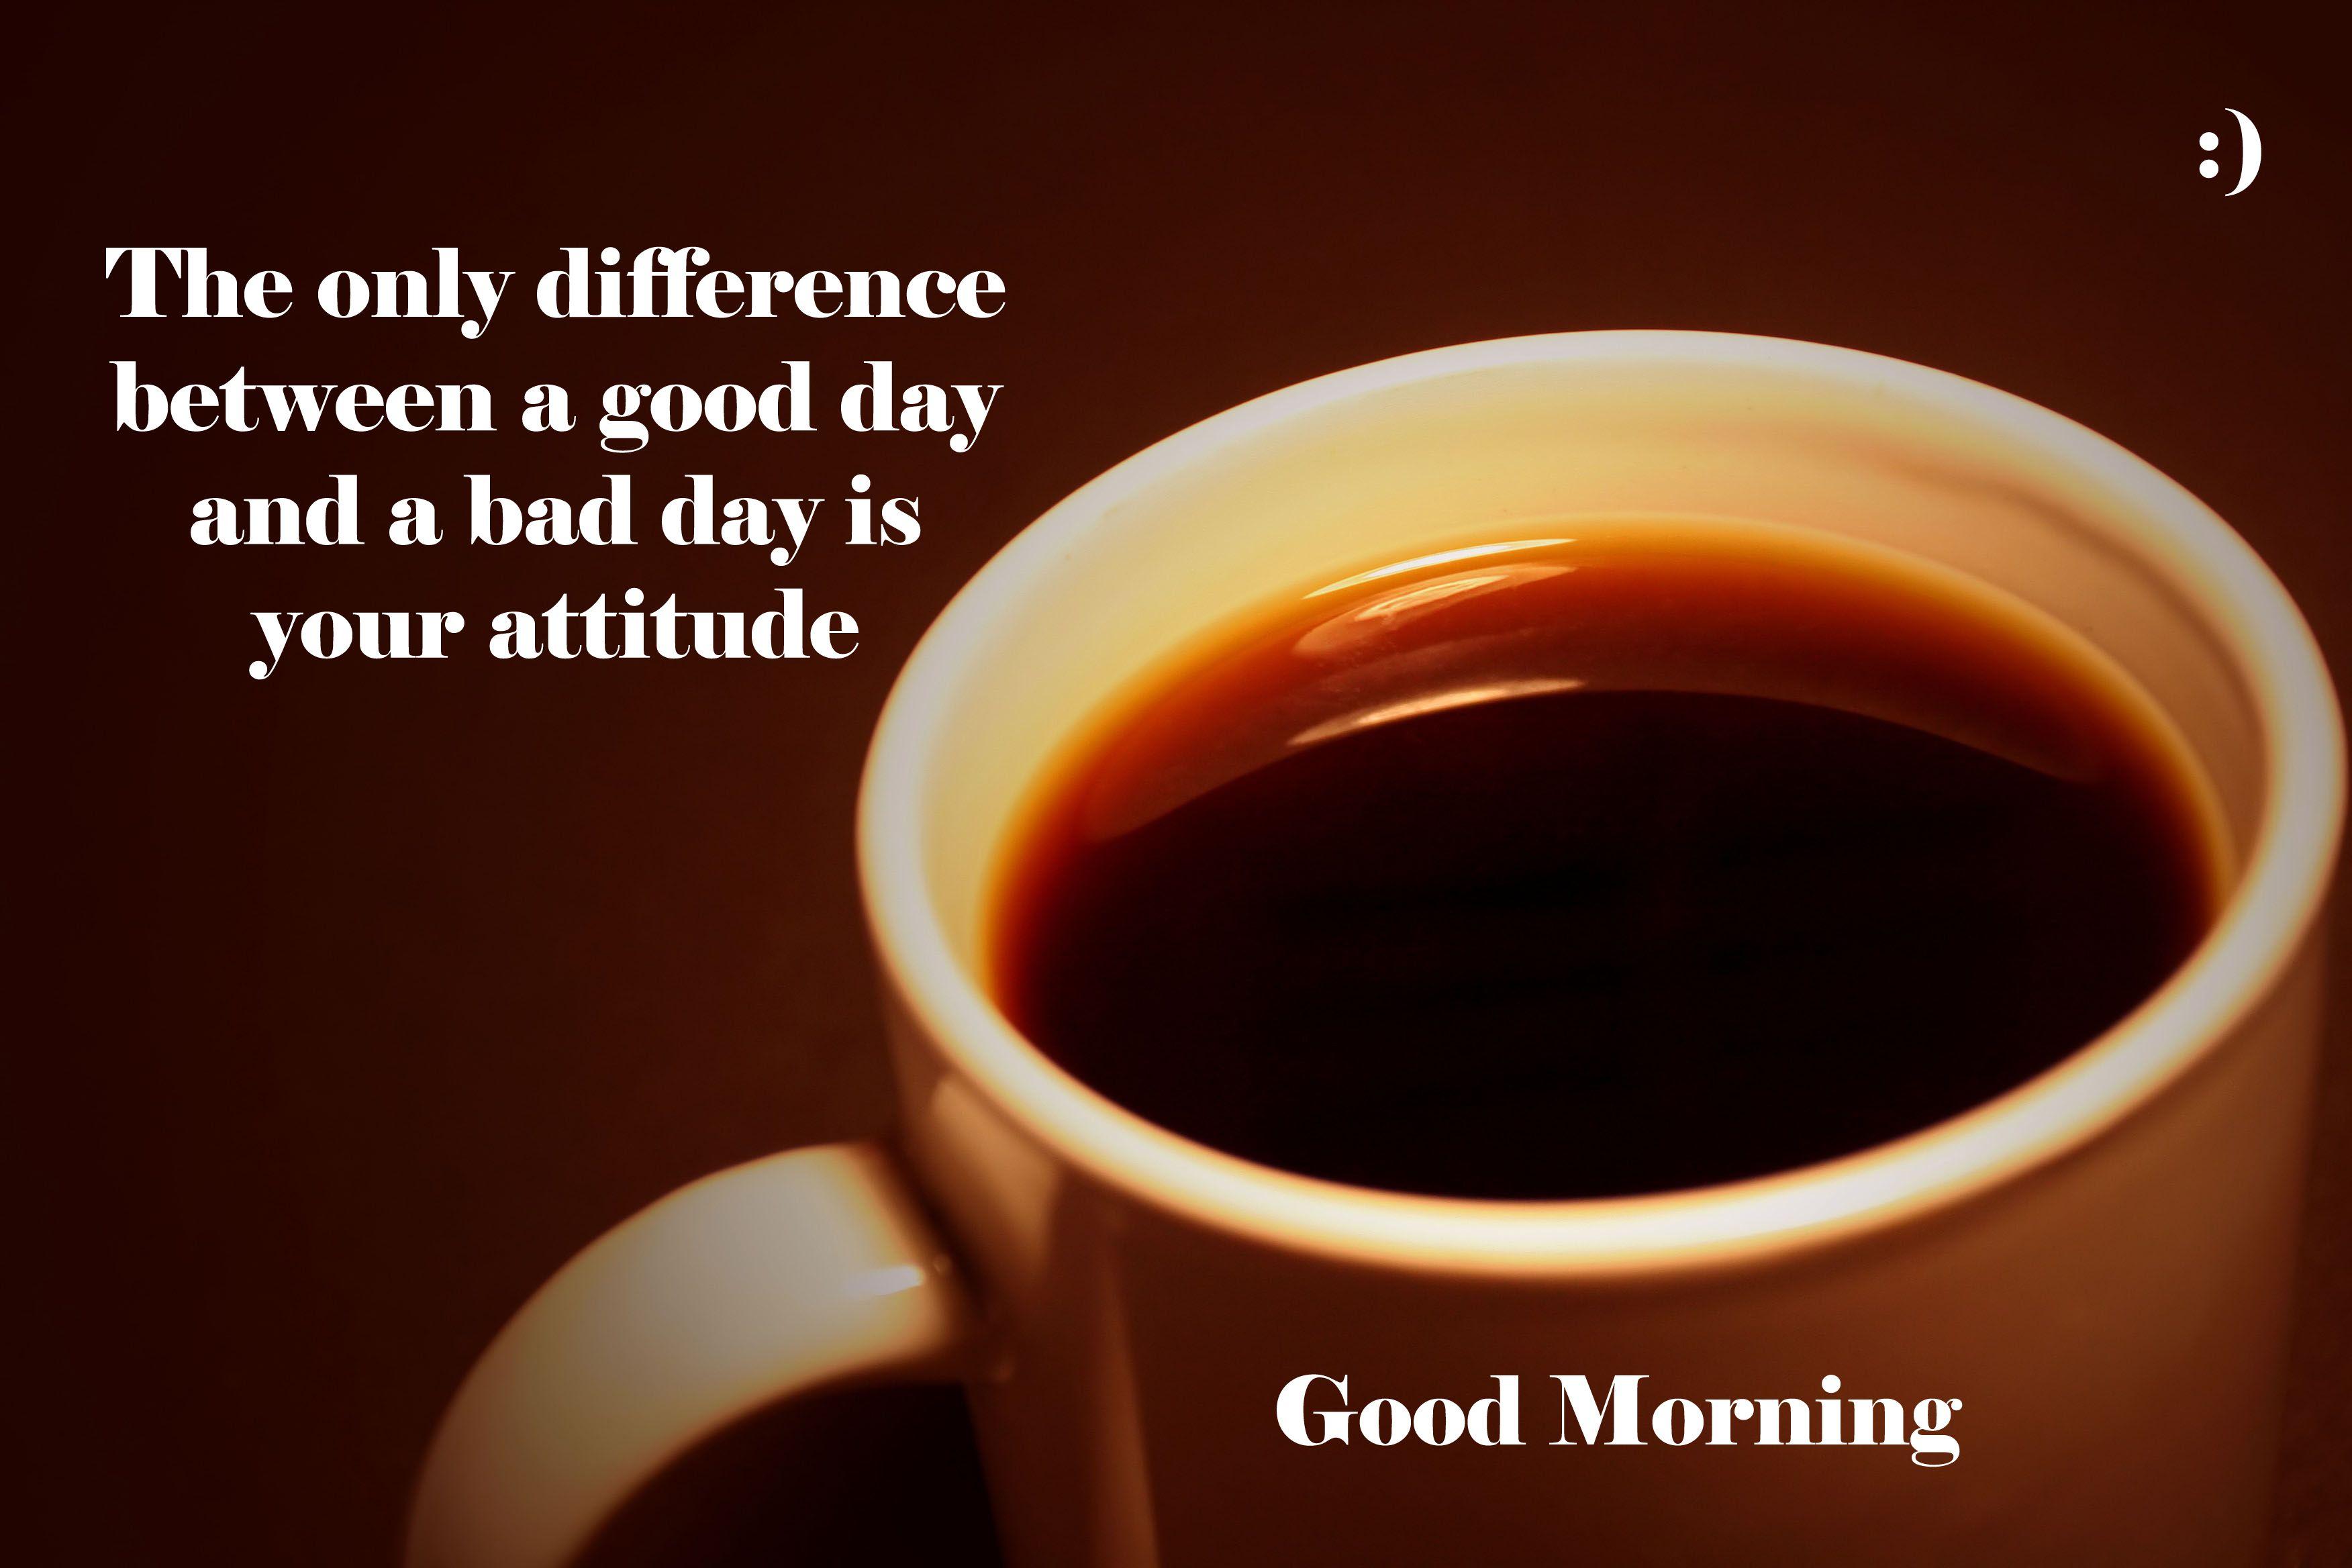 Good Morning Coffee Image With Quotes Good Morning Coffee Cup